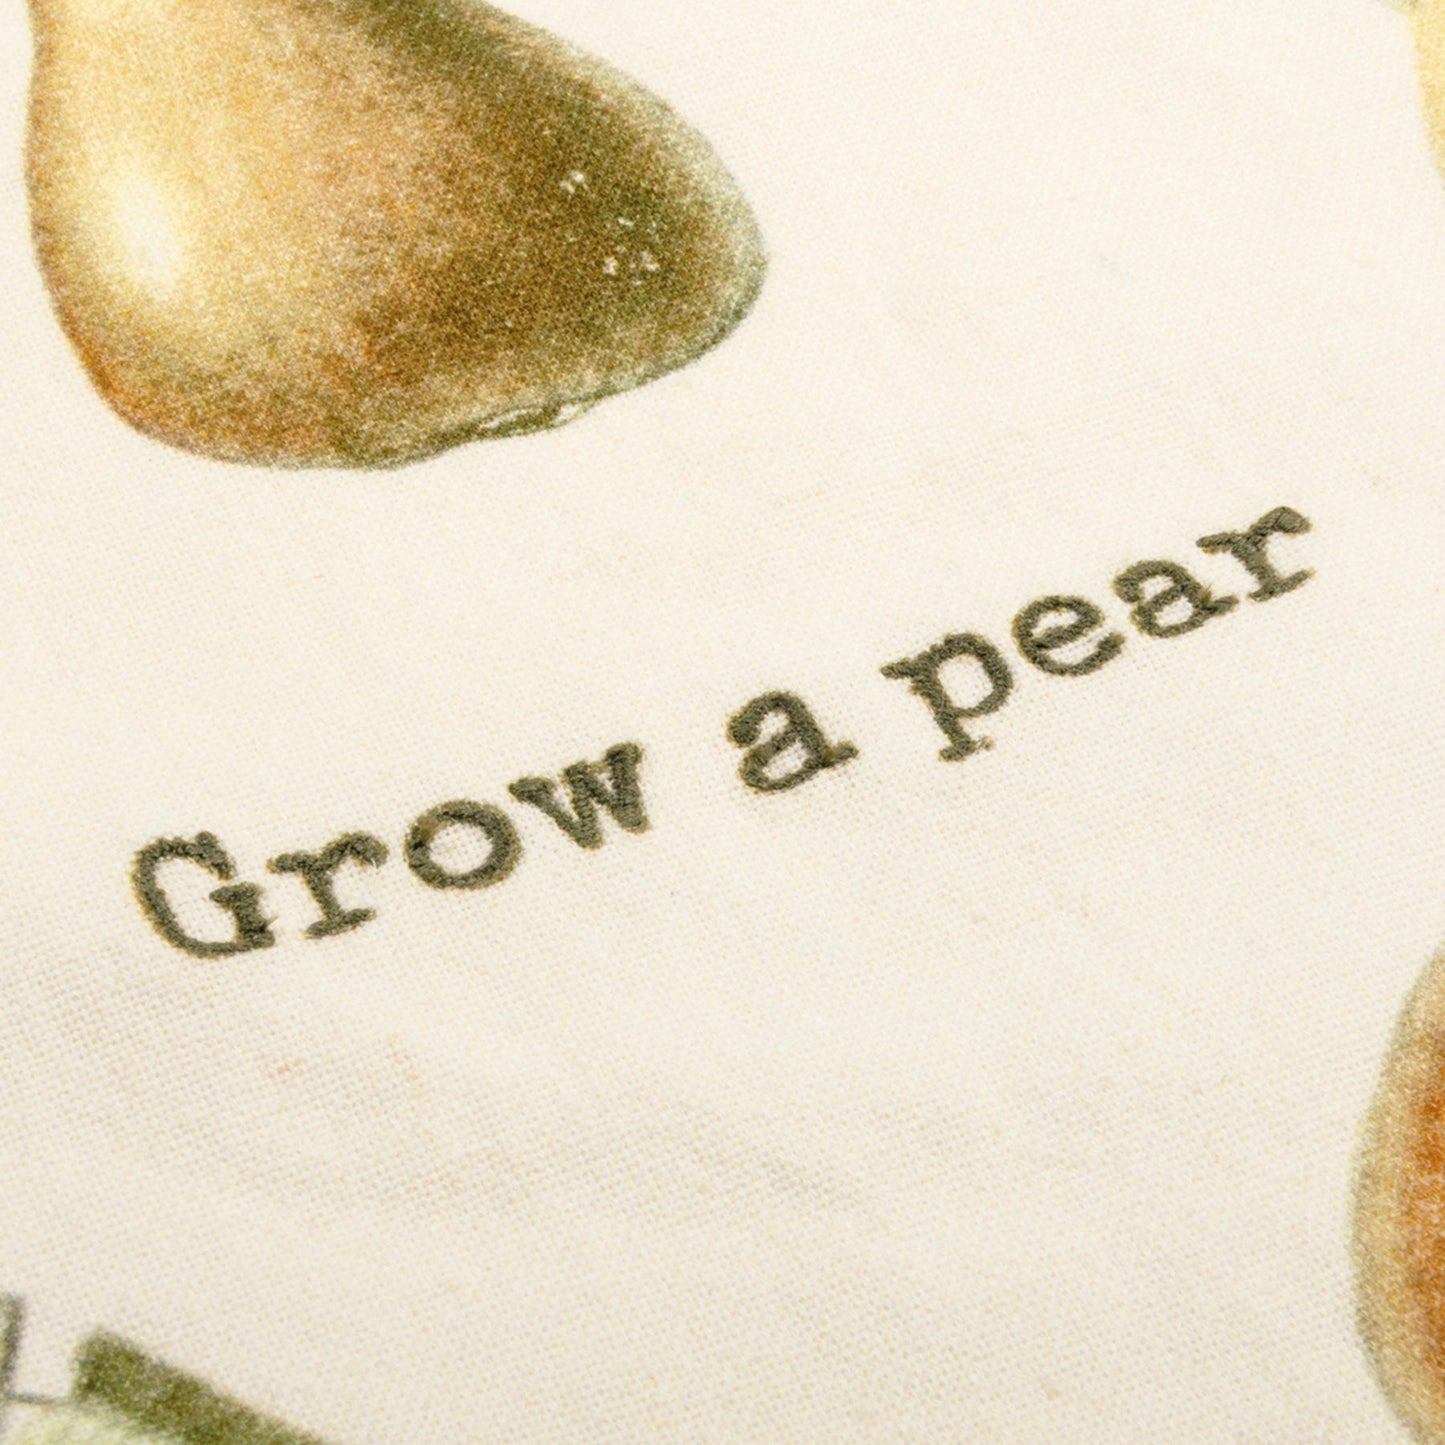 Grow A Pear Funny Dish Cloth Towel | Cotton and Linen | Embroidered Text | 18" x 28"